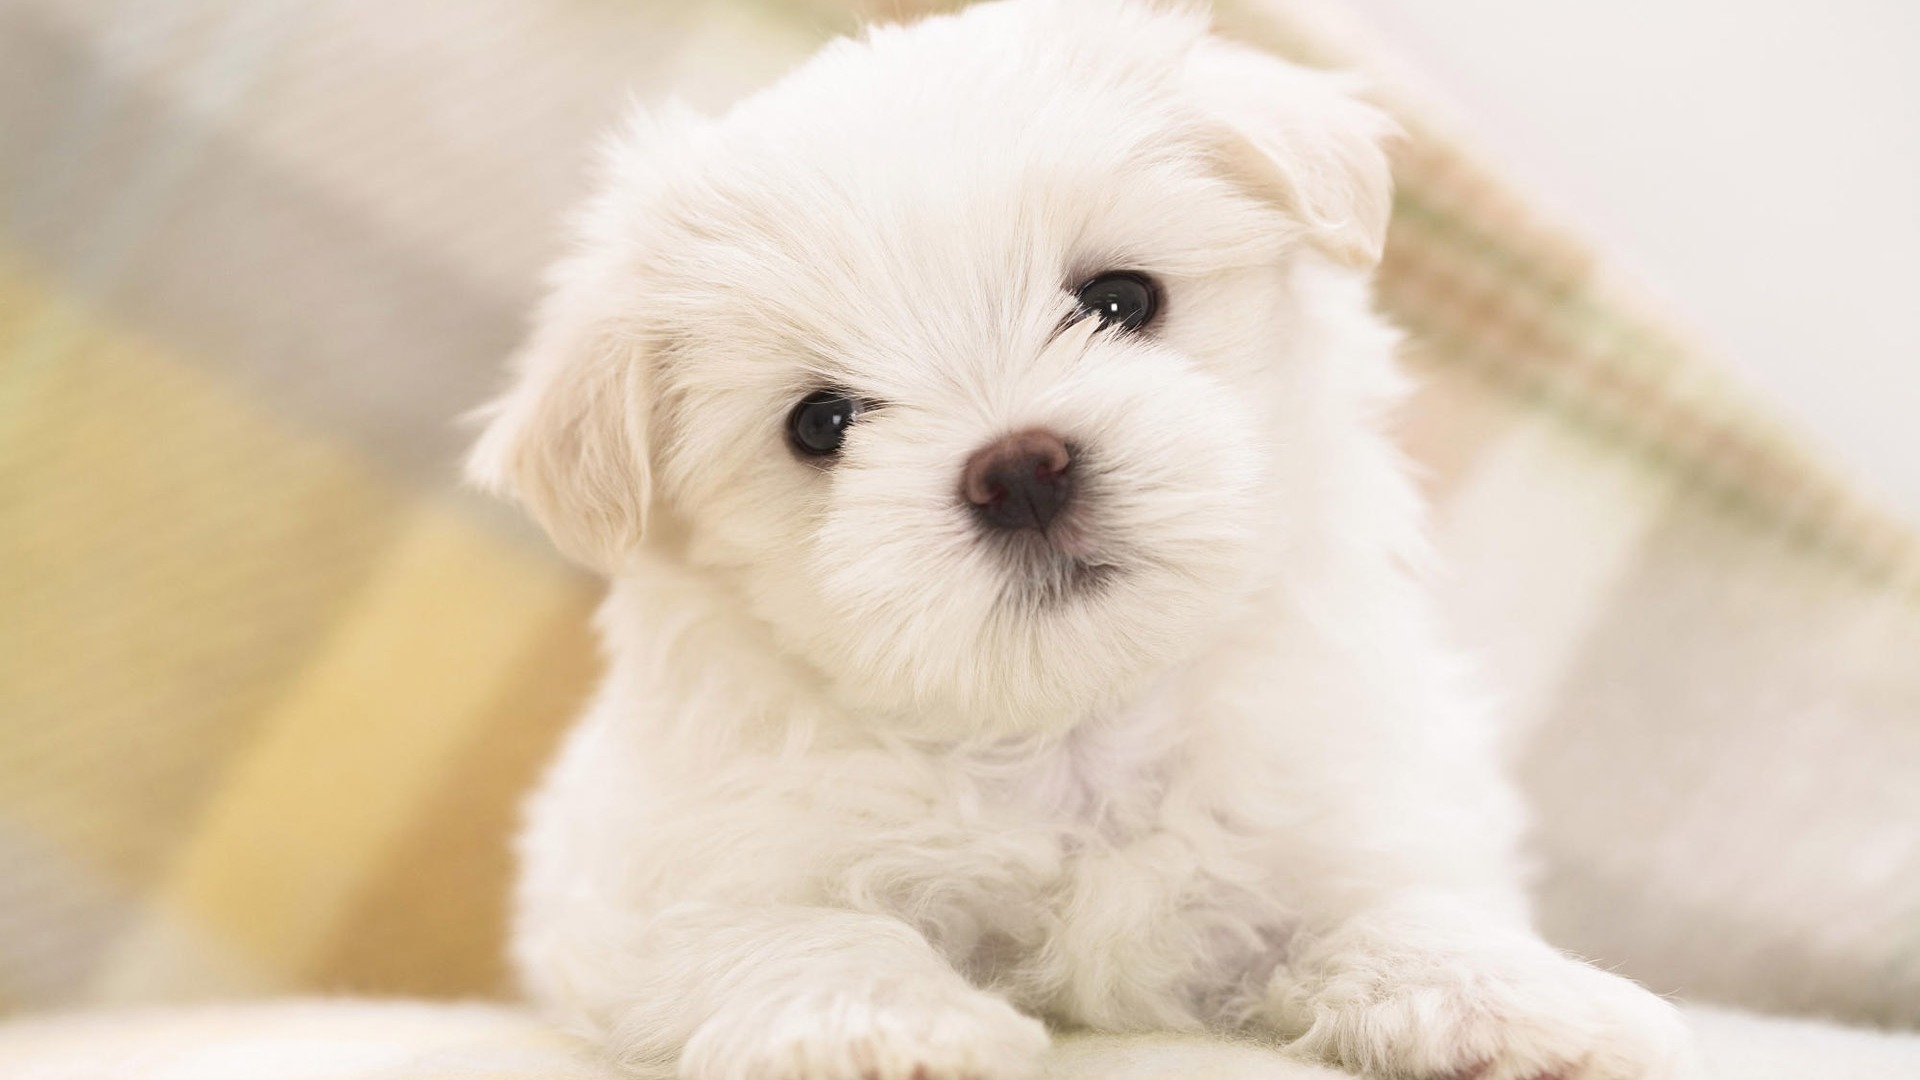 Puppy Photo HD wallpapers (8) #6 - 1920x1080